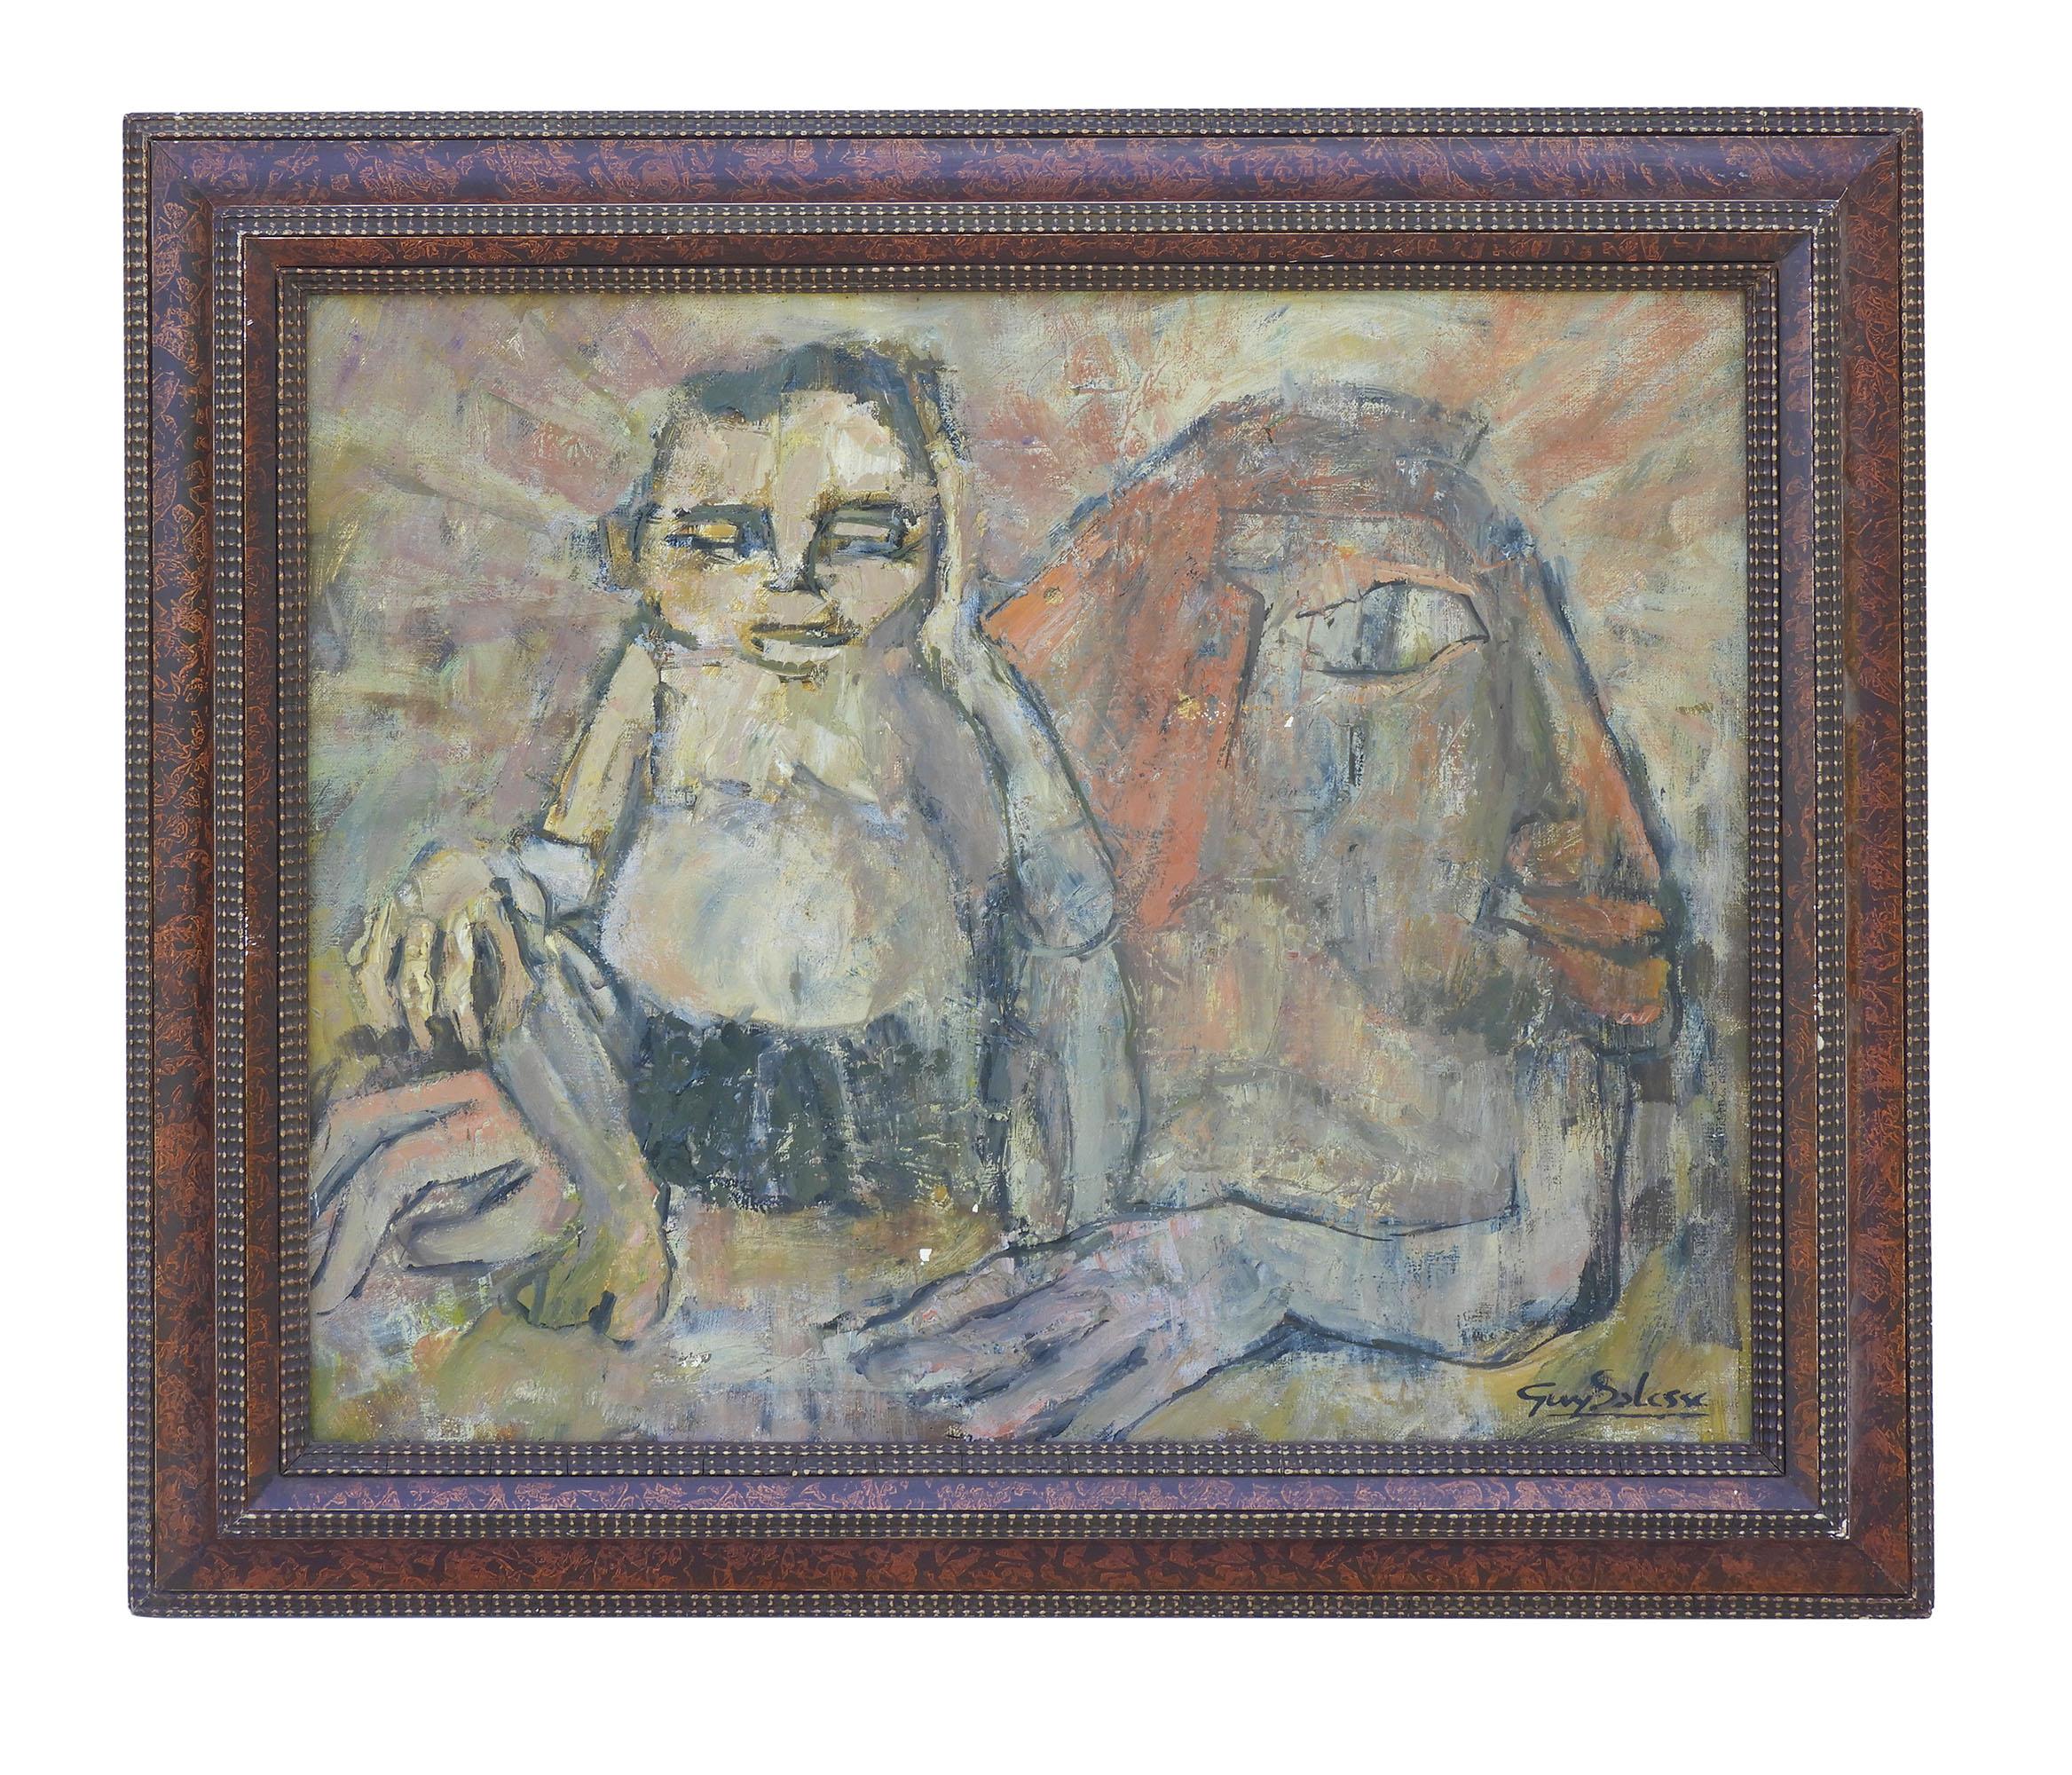 ‘Dans Les Bras du Sphinx’ Guy Salesse c1960 France

‘Dans Les Bras du Sphinx’ Painting by Celebrated French Limoges Artist Guy Salesse.

‘In the arms of the Sphinx’ Acrylic on Canvas C1960.

 
Dimensions

Height: 75cm/29.5 in. Width: 64cm/25 in.